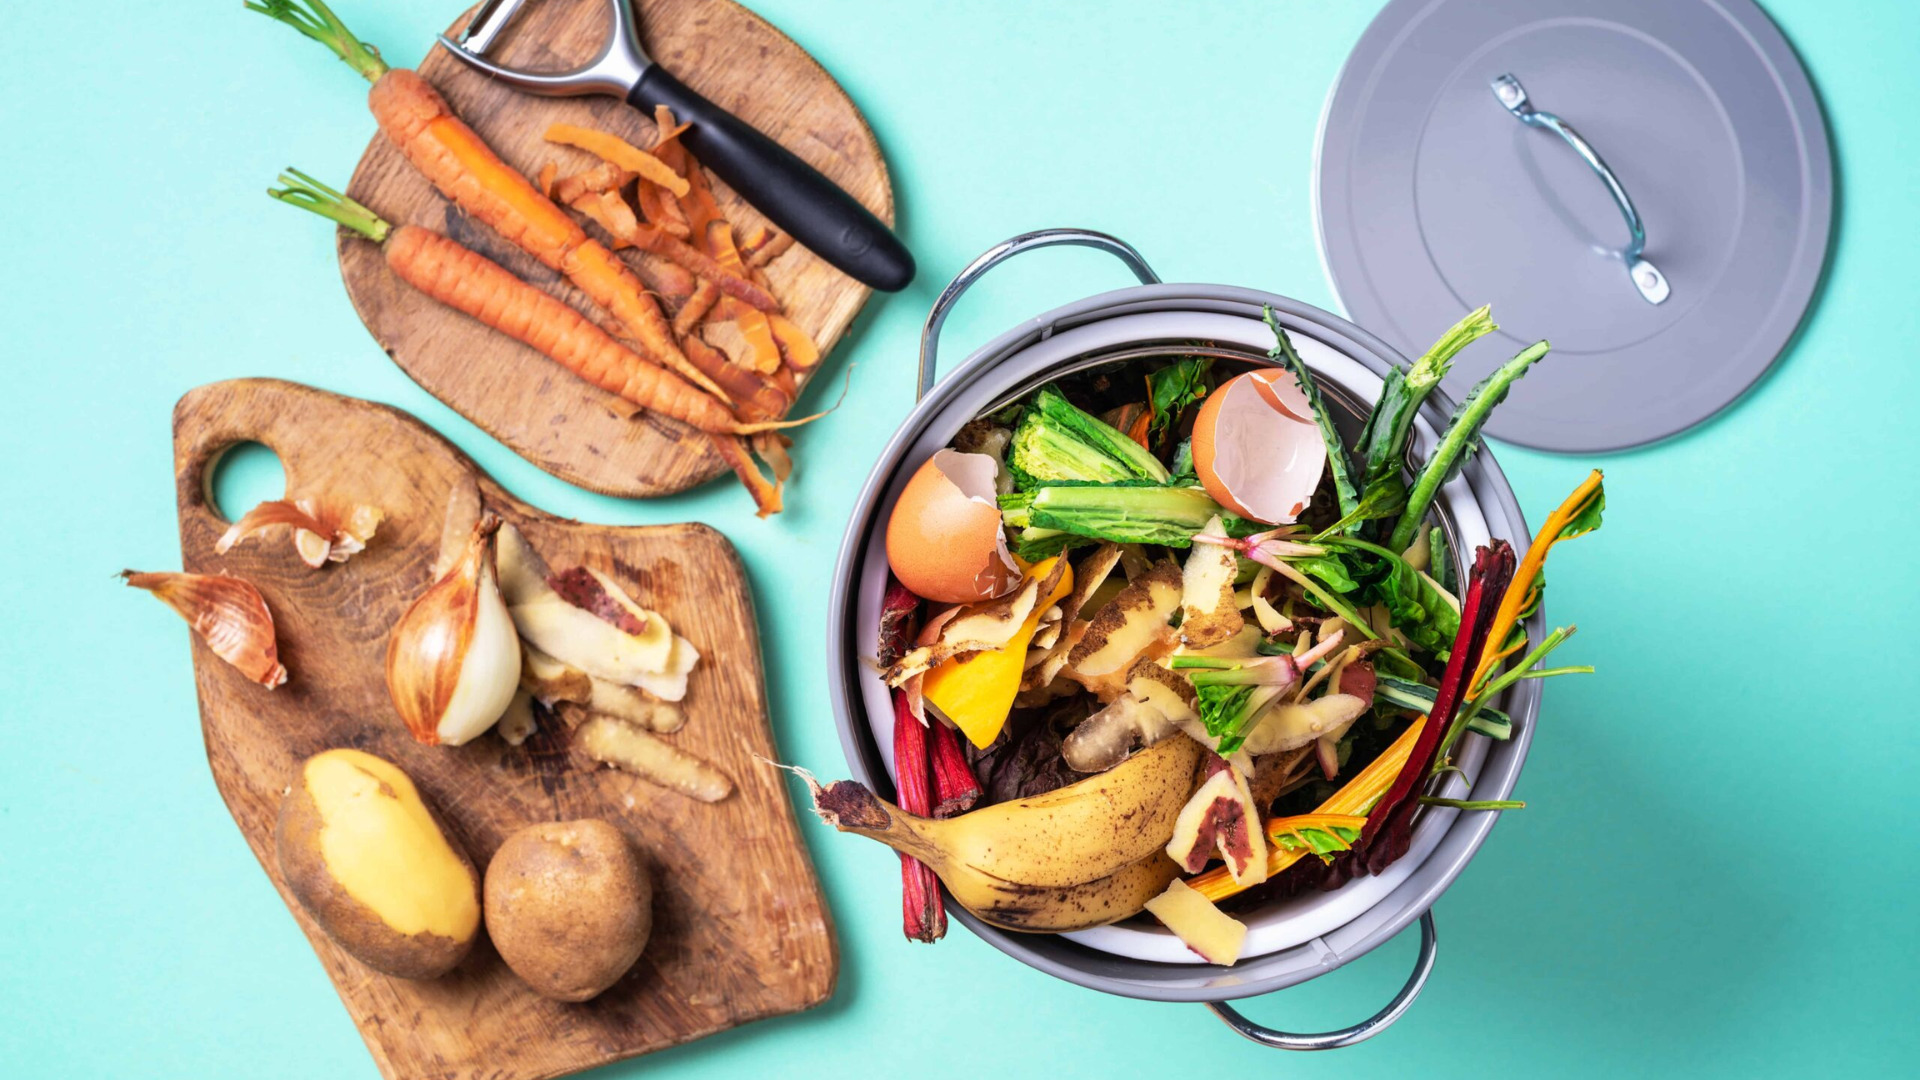 Here’s how to use your food scraps to create delicious dishes